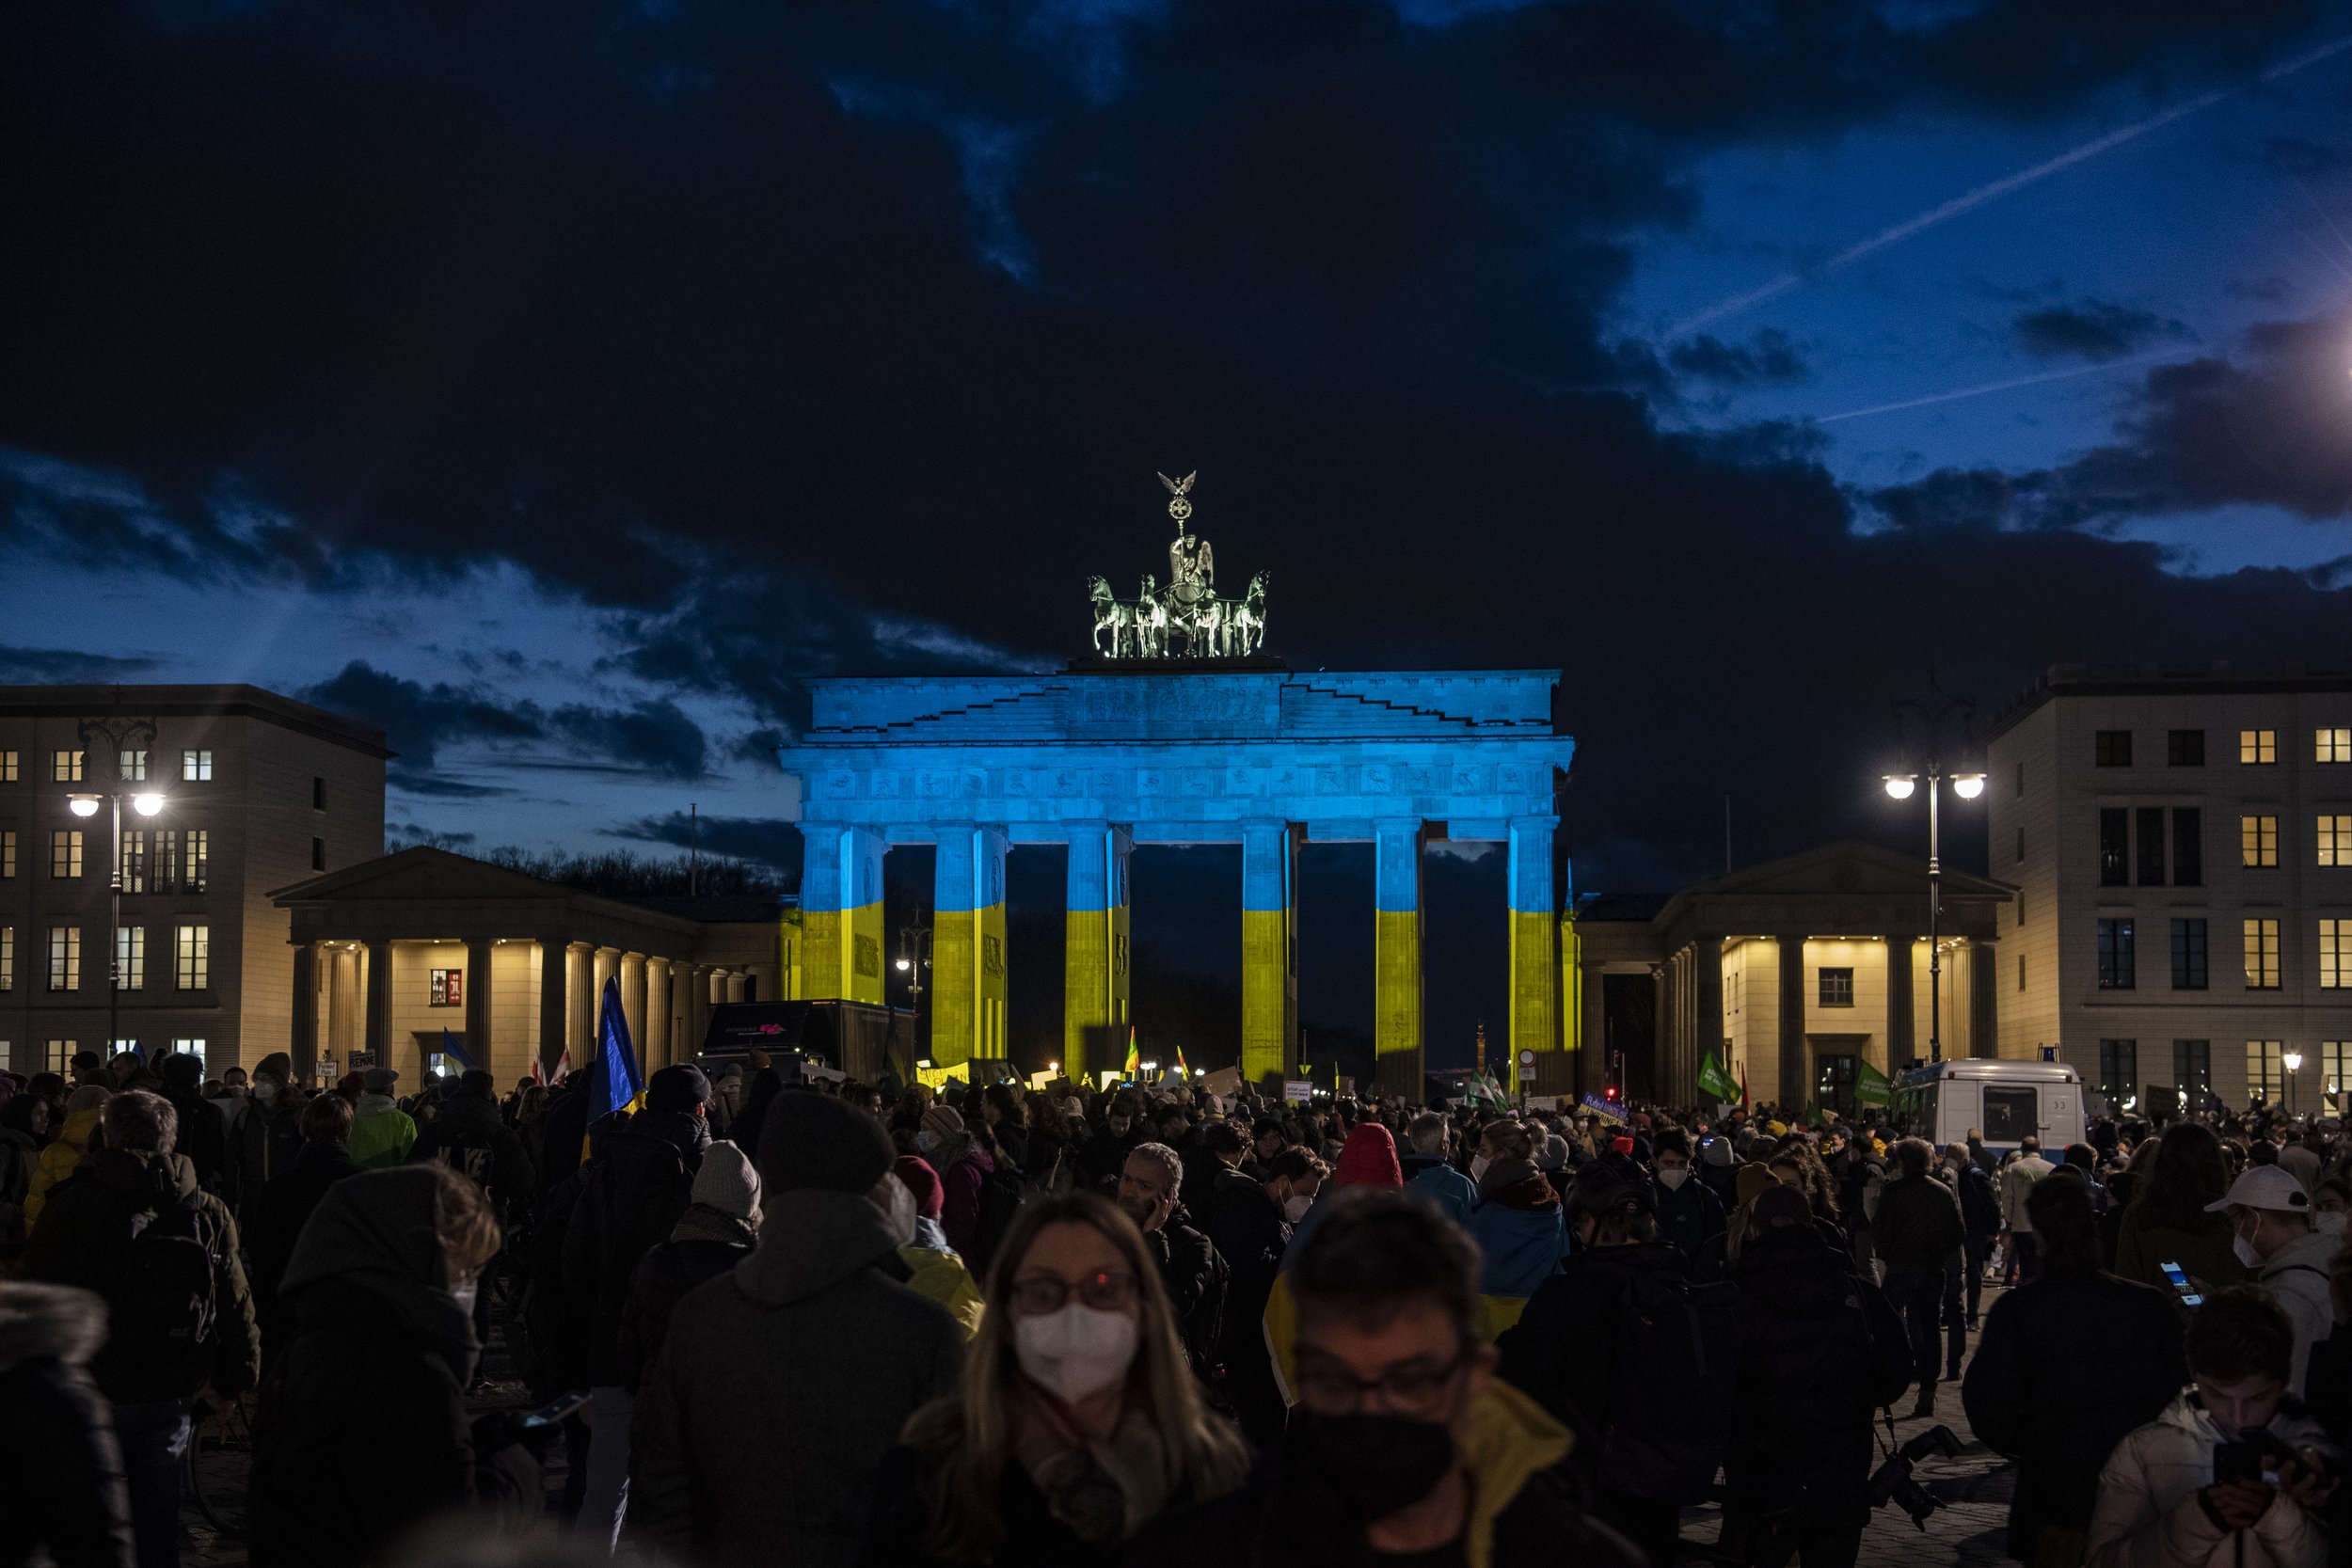  The Brandenburg Gate is illuminated in the colors of Ukraine during a solidarity demonstration following the Russian invasion into the Ukraine, in Berlin, Germany, Thursday, Feb. 24, 2022. (Paul Zinken/dpa via AP) 